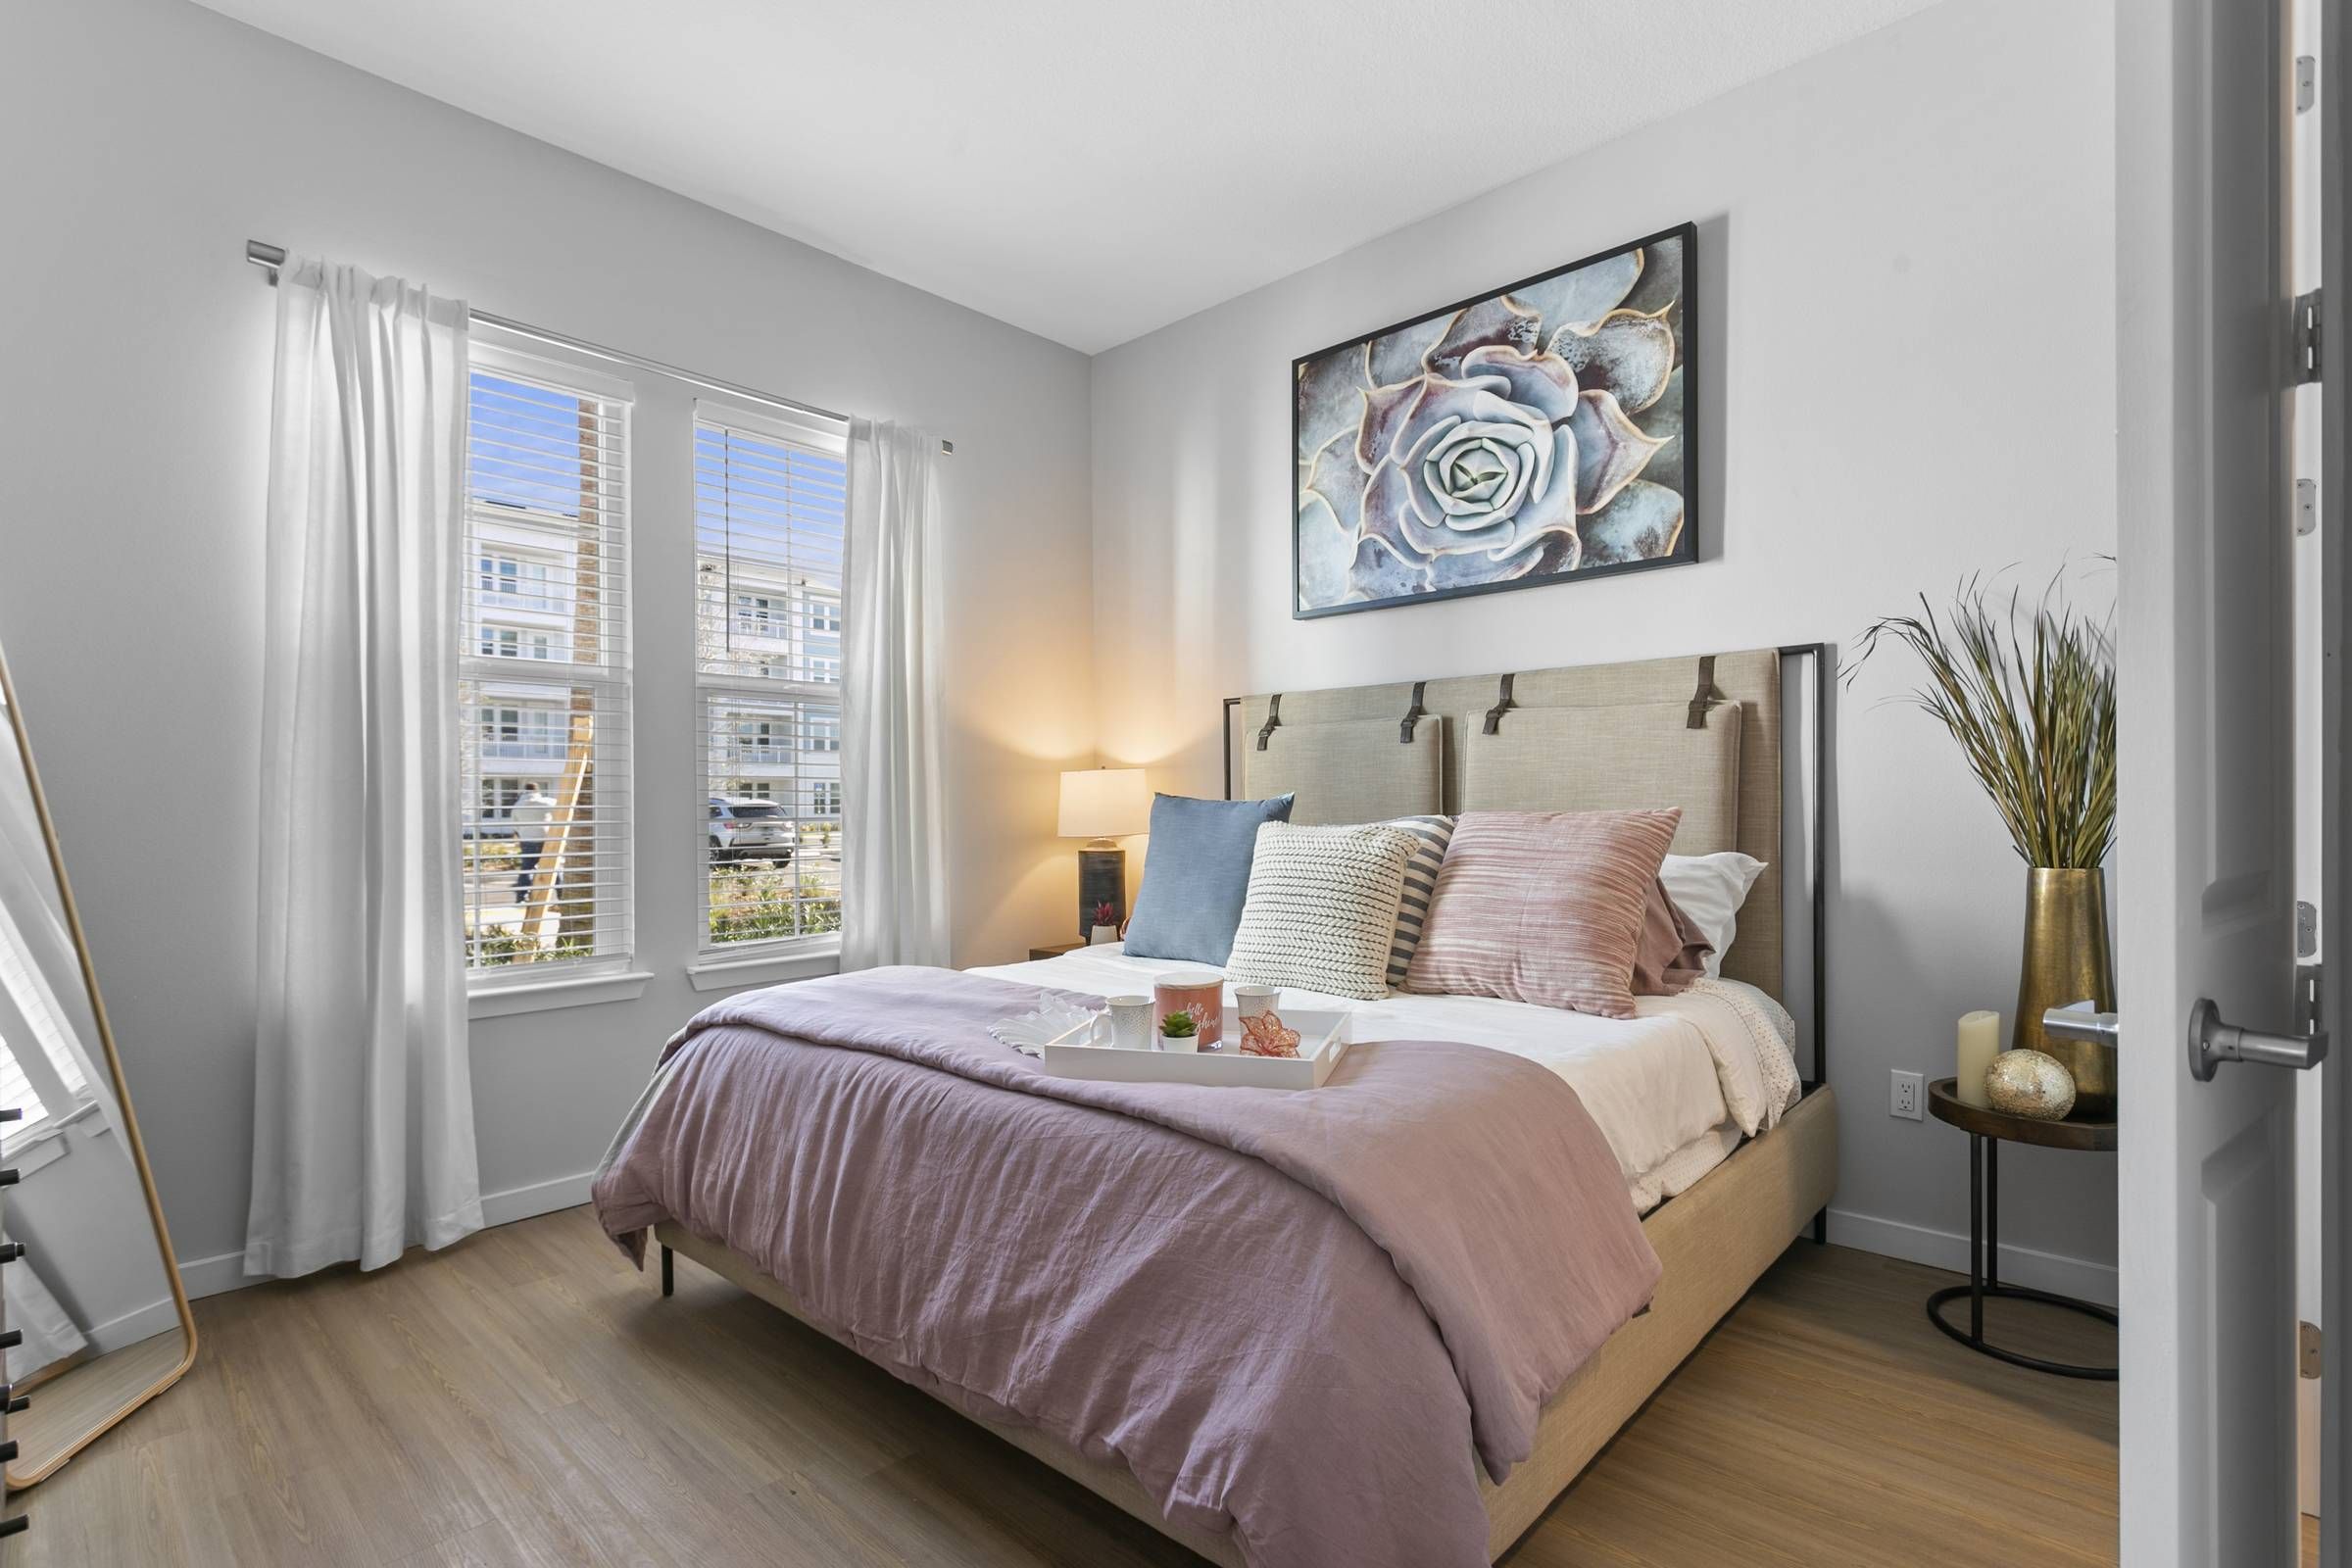 The bedroom at Alta Belleair, showcasing a comfortable bed with pastel bedding, a large window for natural light, and elegant artwork above the headboard.